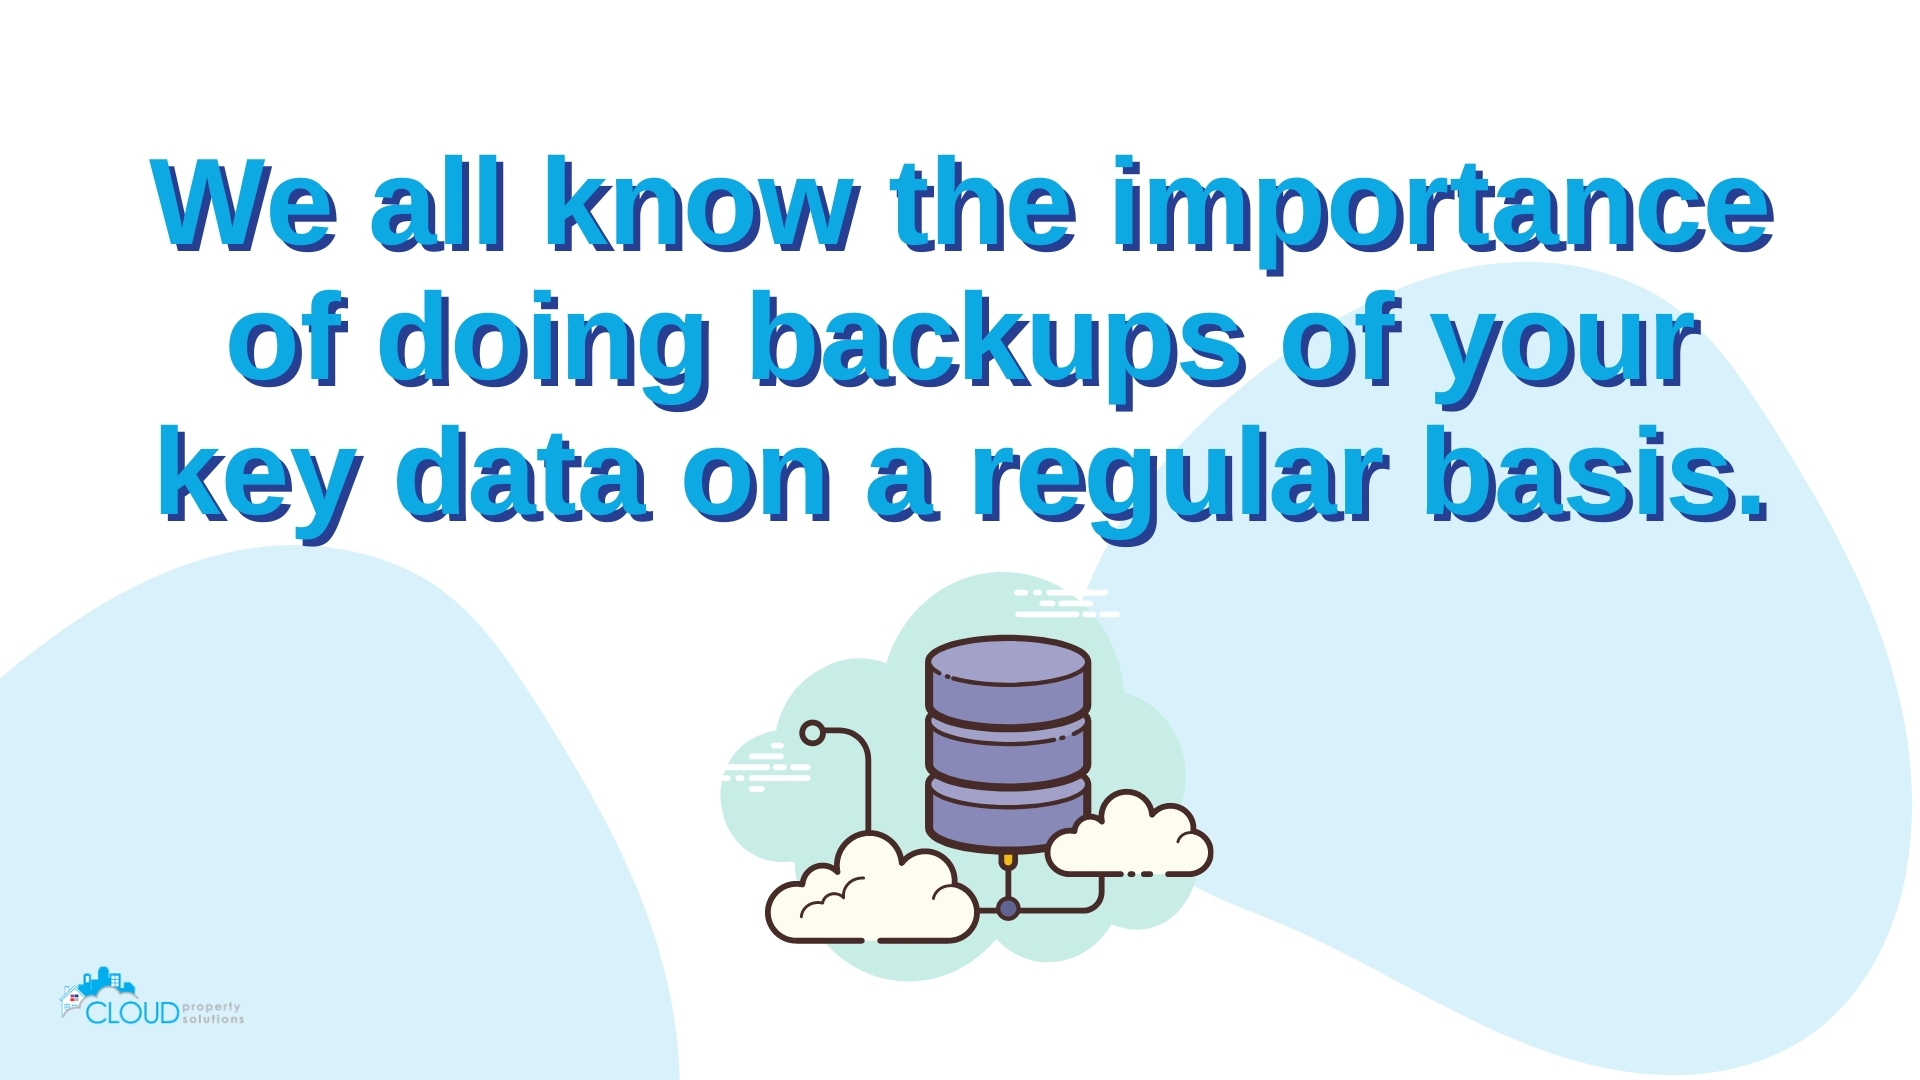 Regular backups of your data is important.